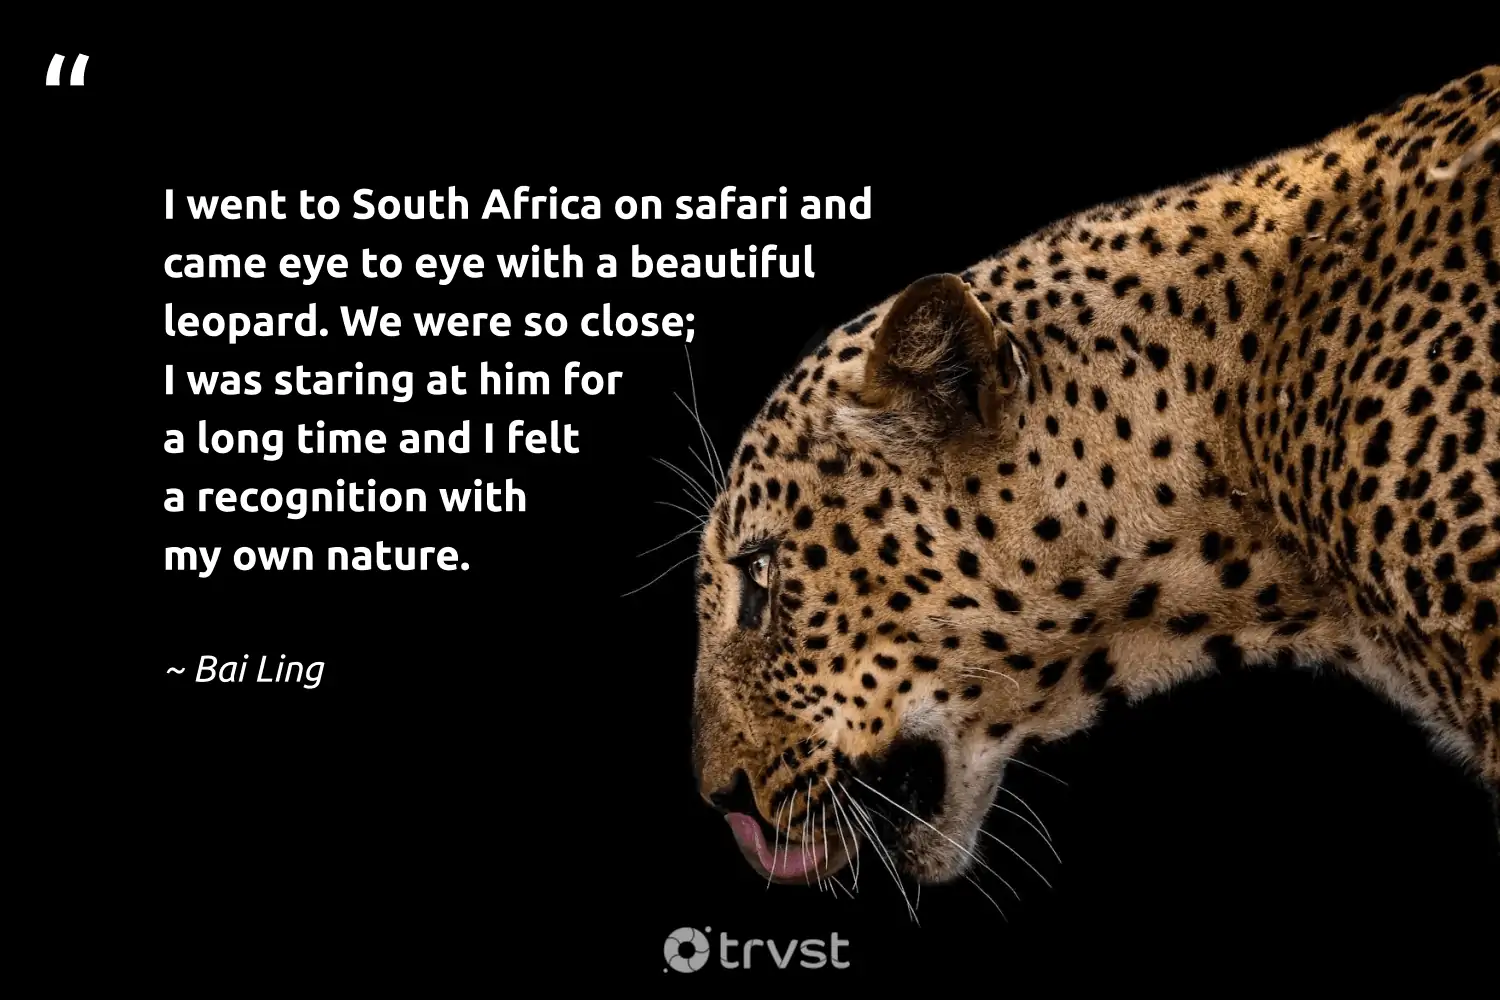 46 Leopard Quotes and Leopard Sayings to Inspire Their Protection